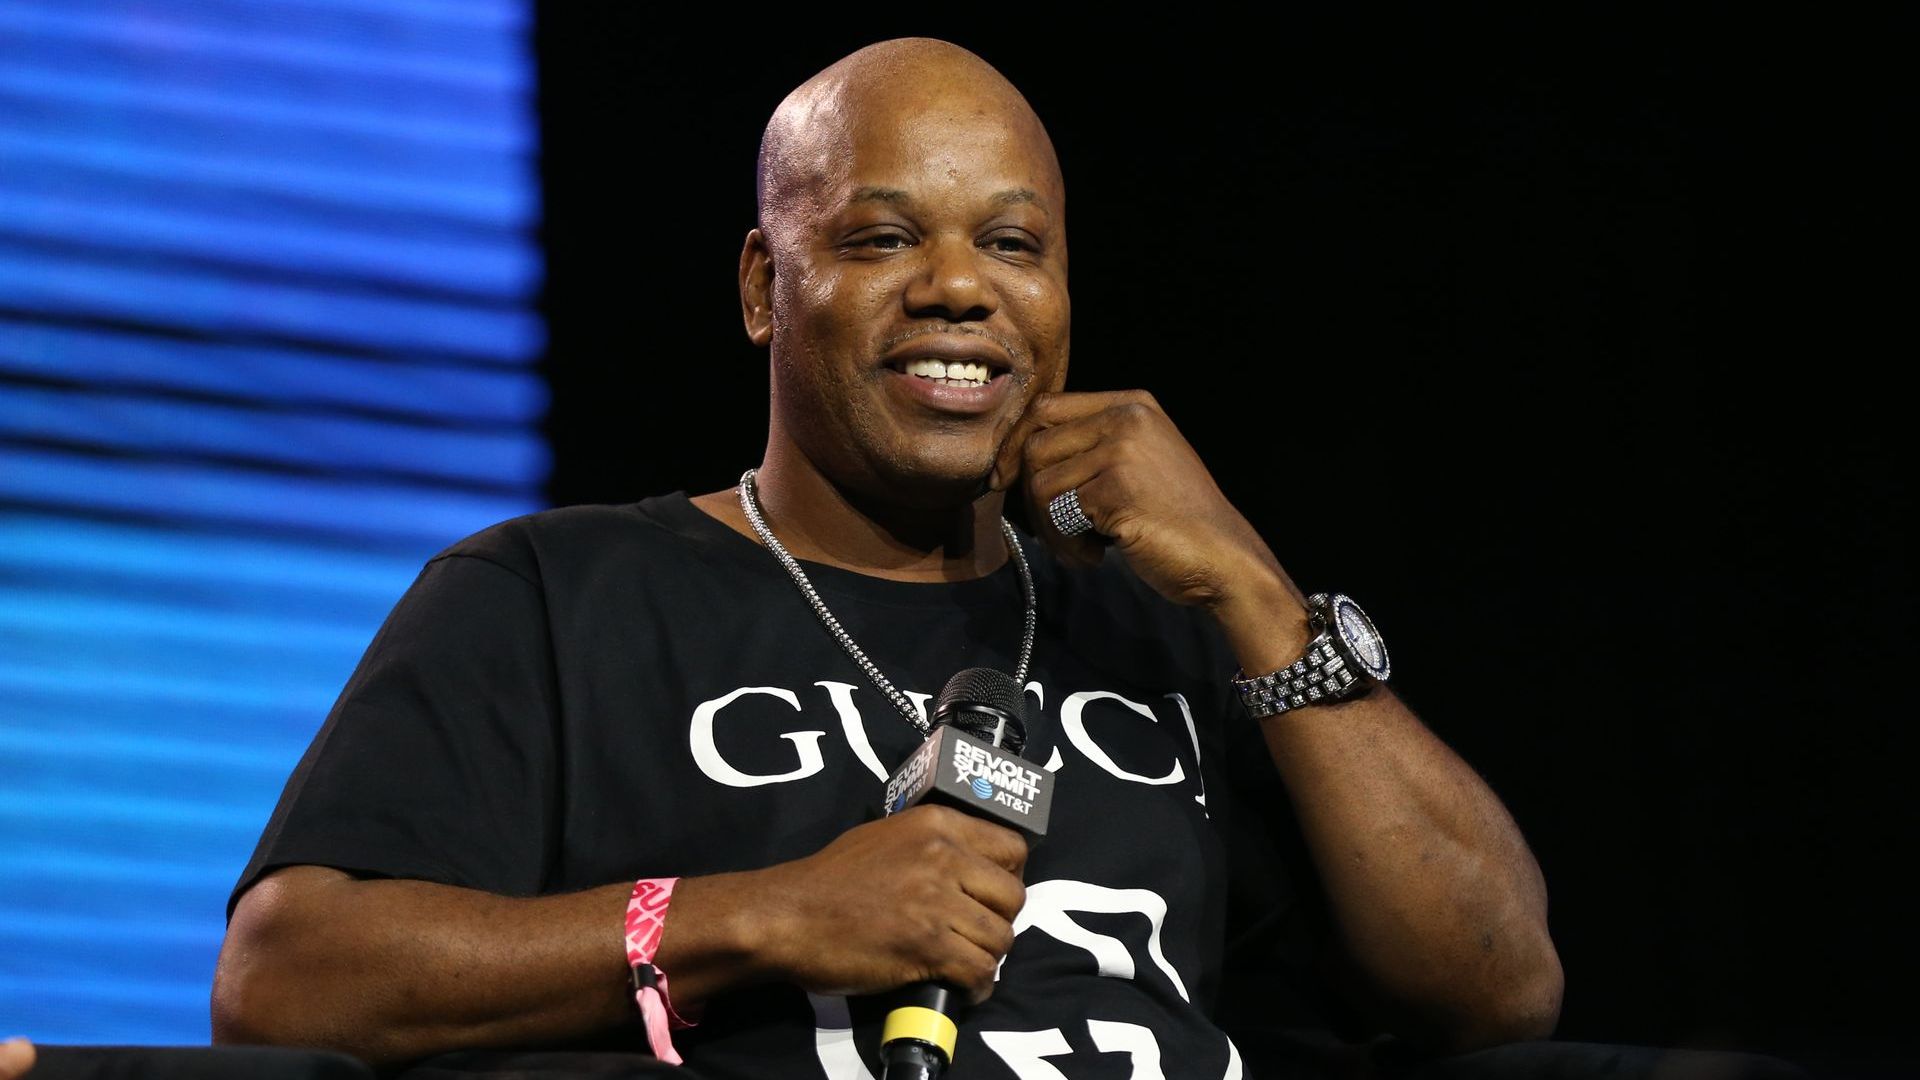 Too Short Explains Why His Song With Drake Never Happened